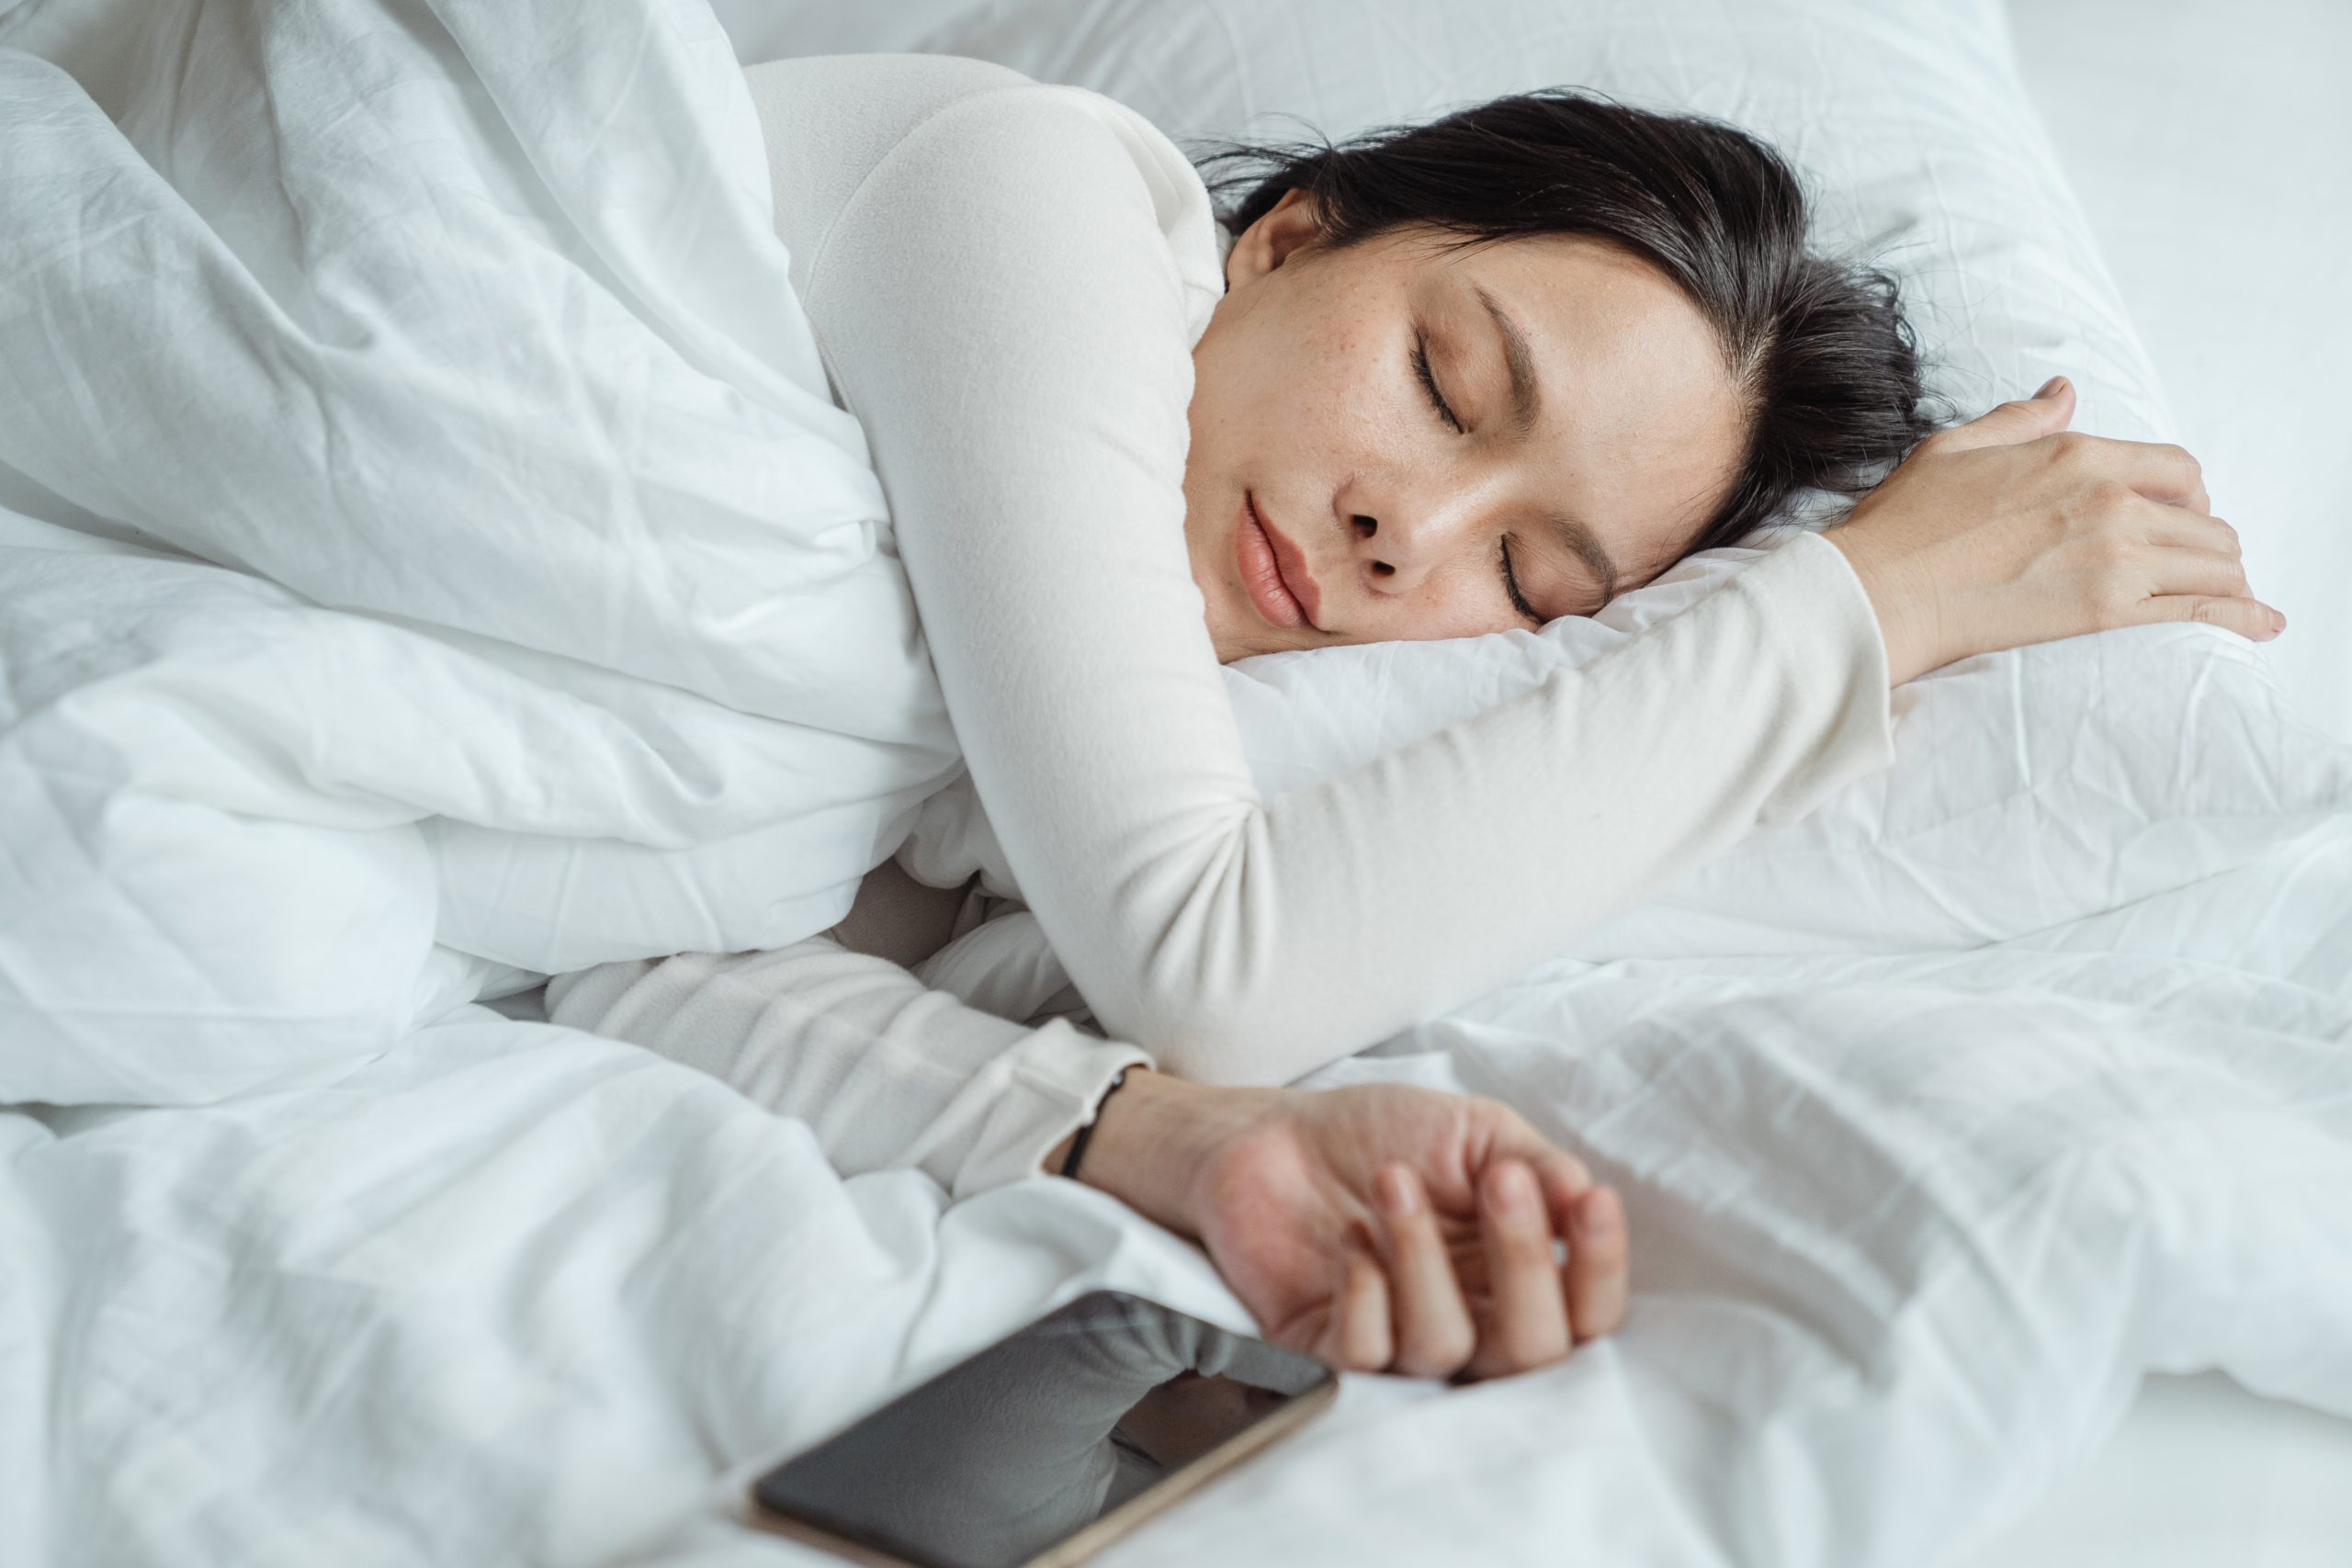 8 Products to Help You Get a Better Night’s Sleep